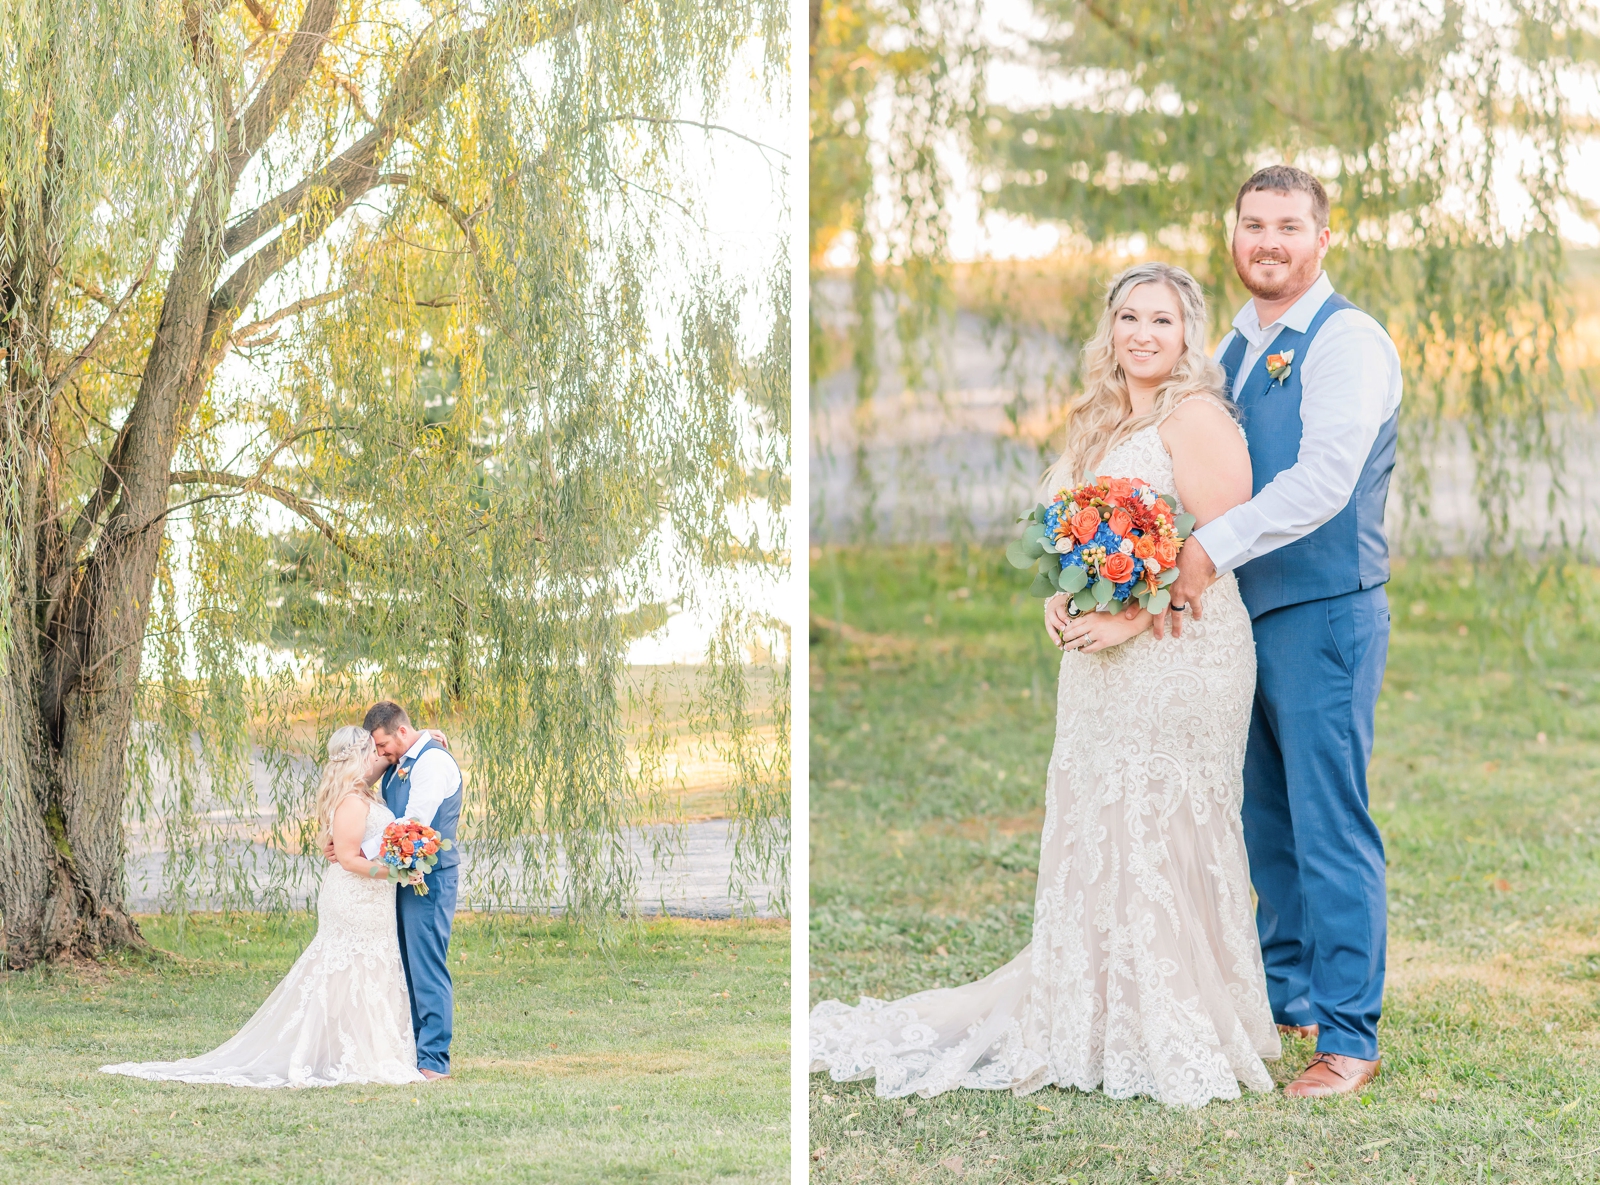 The Benefits Of Sunset Portraits On Your Wedding Day